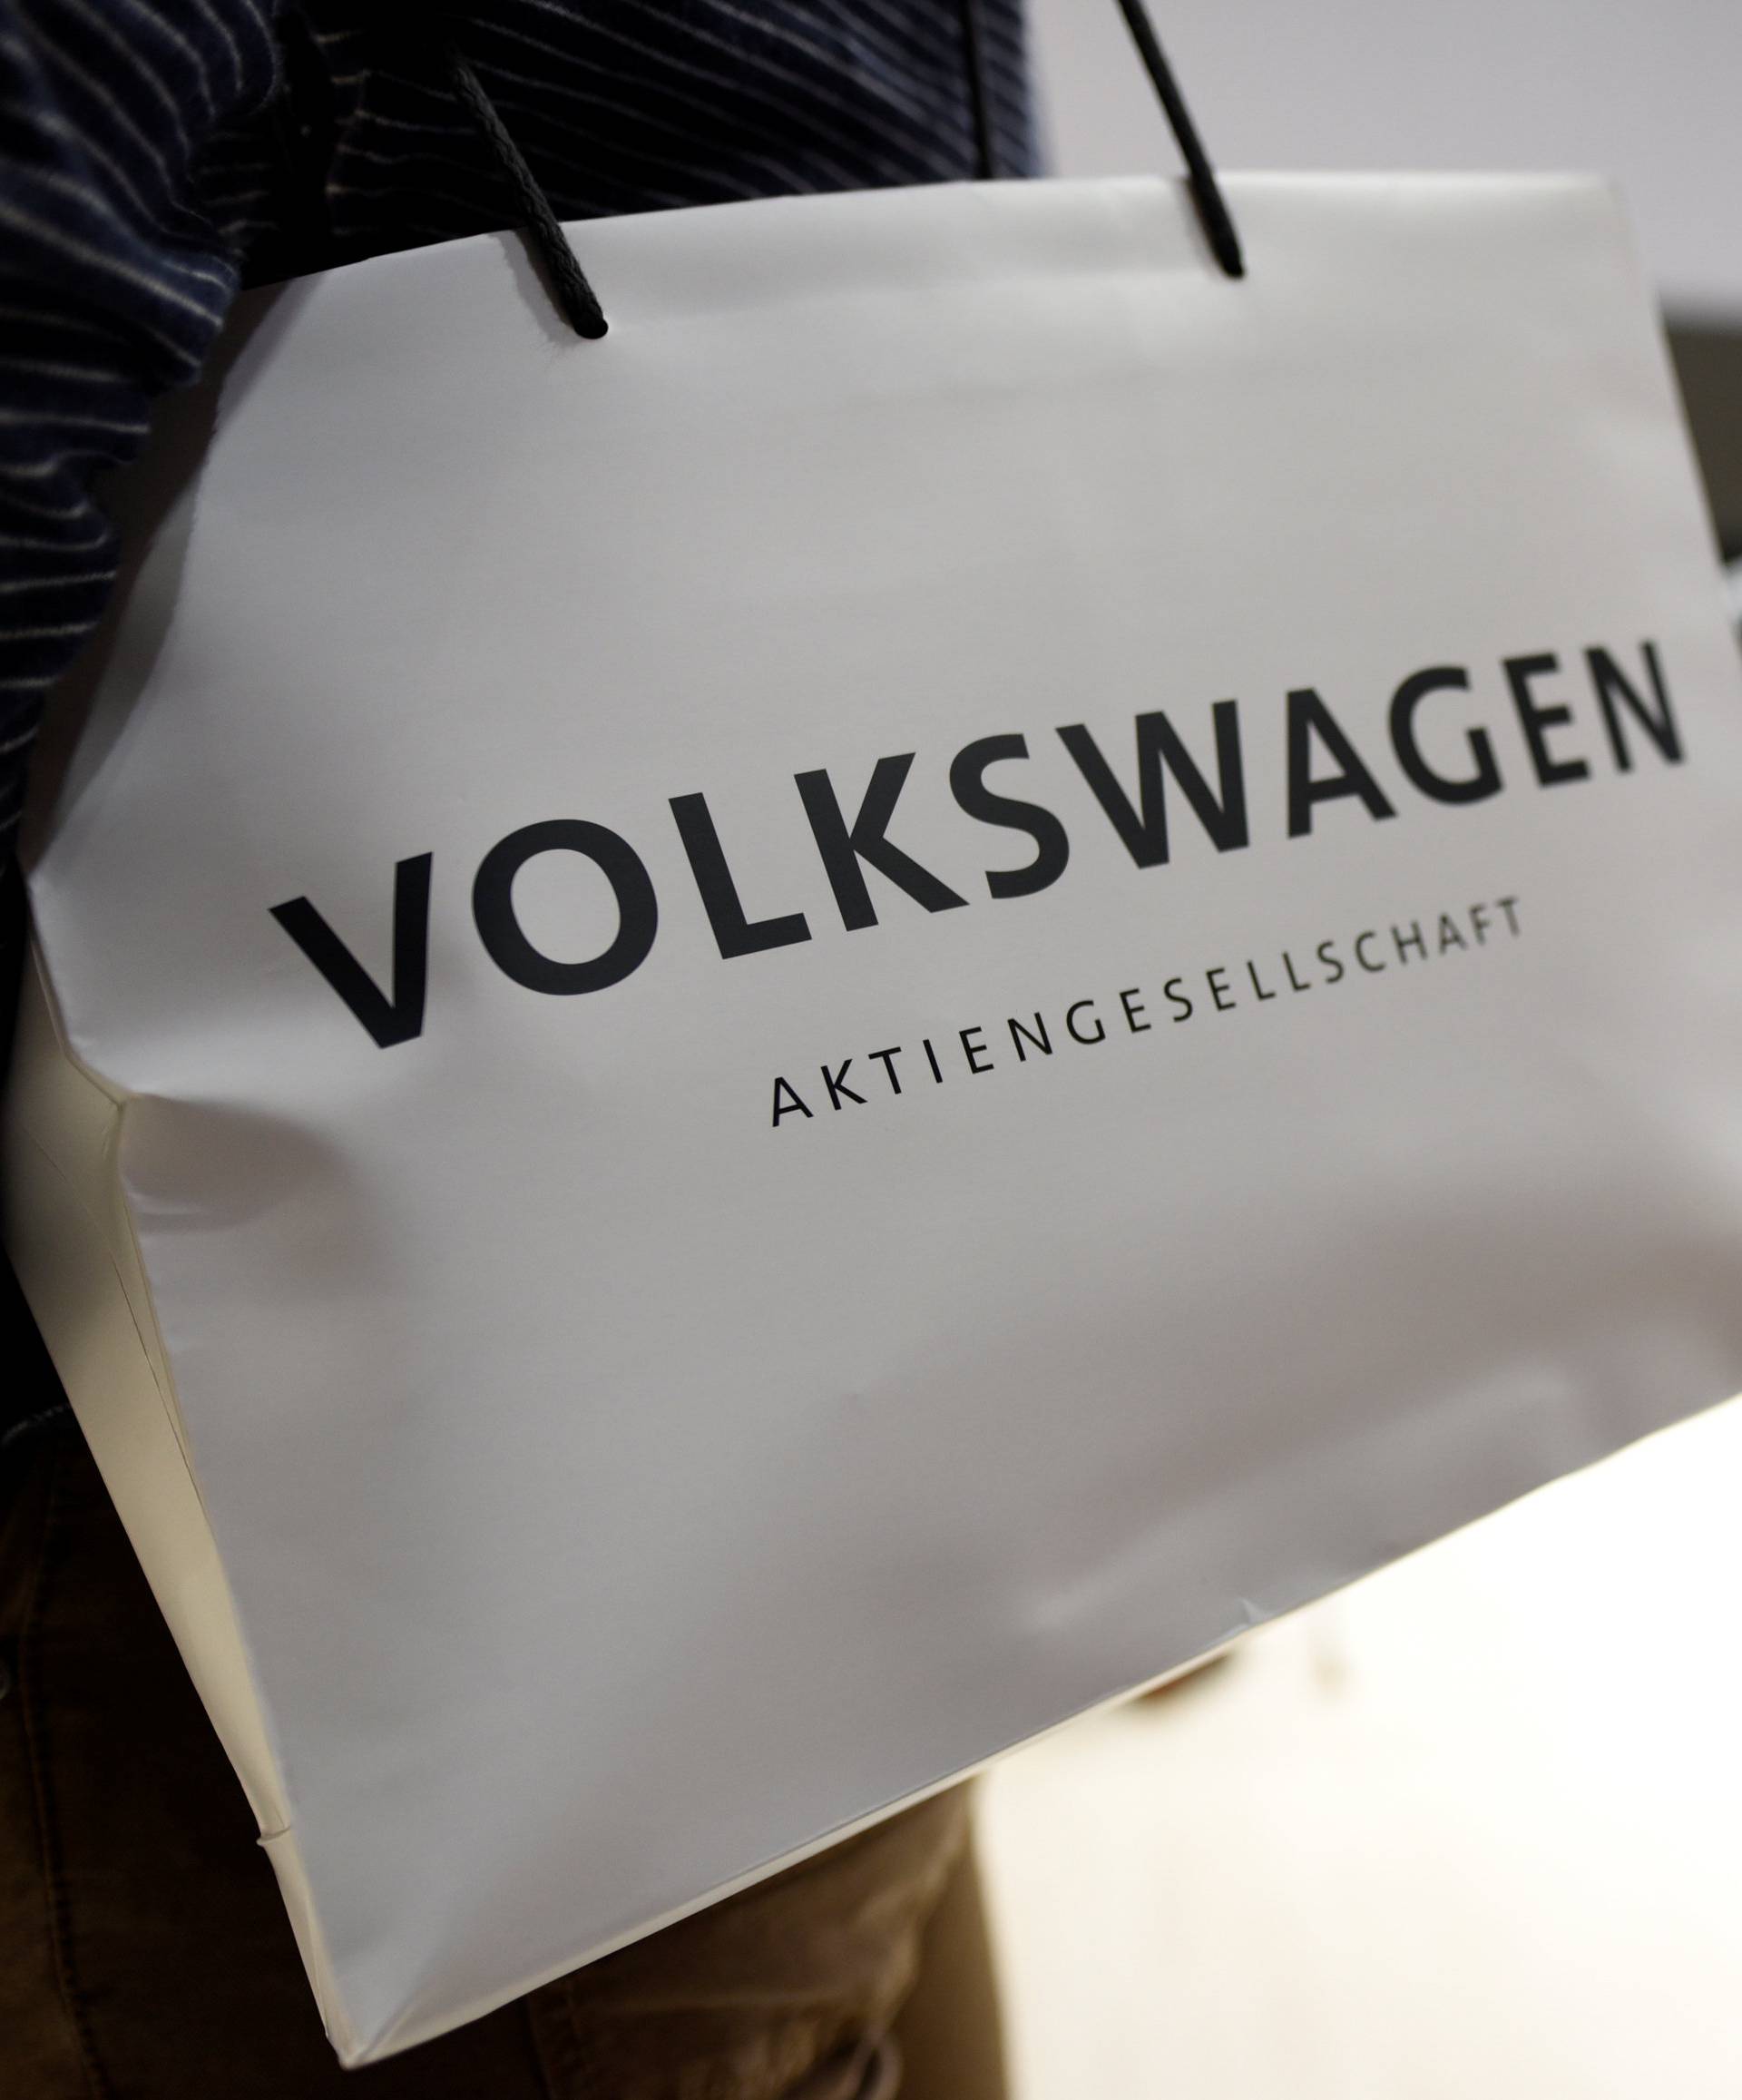 A Volkswagen shareholder carries a bag at the annual shareholder meeting in Hanover